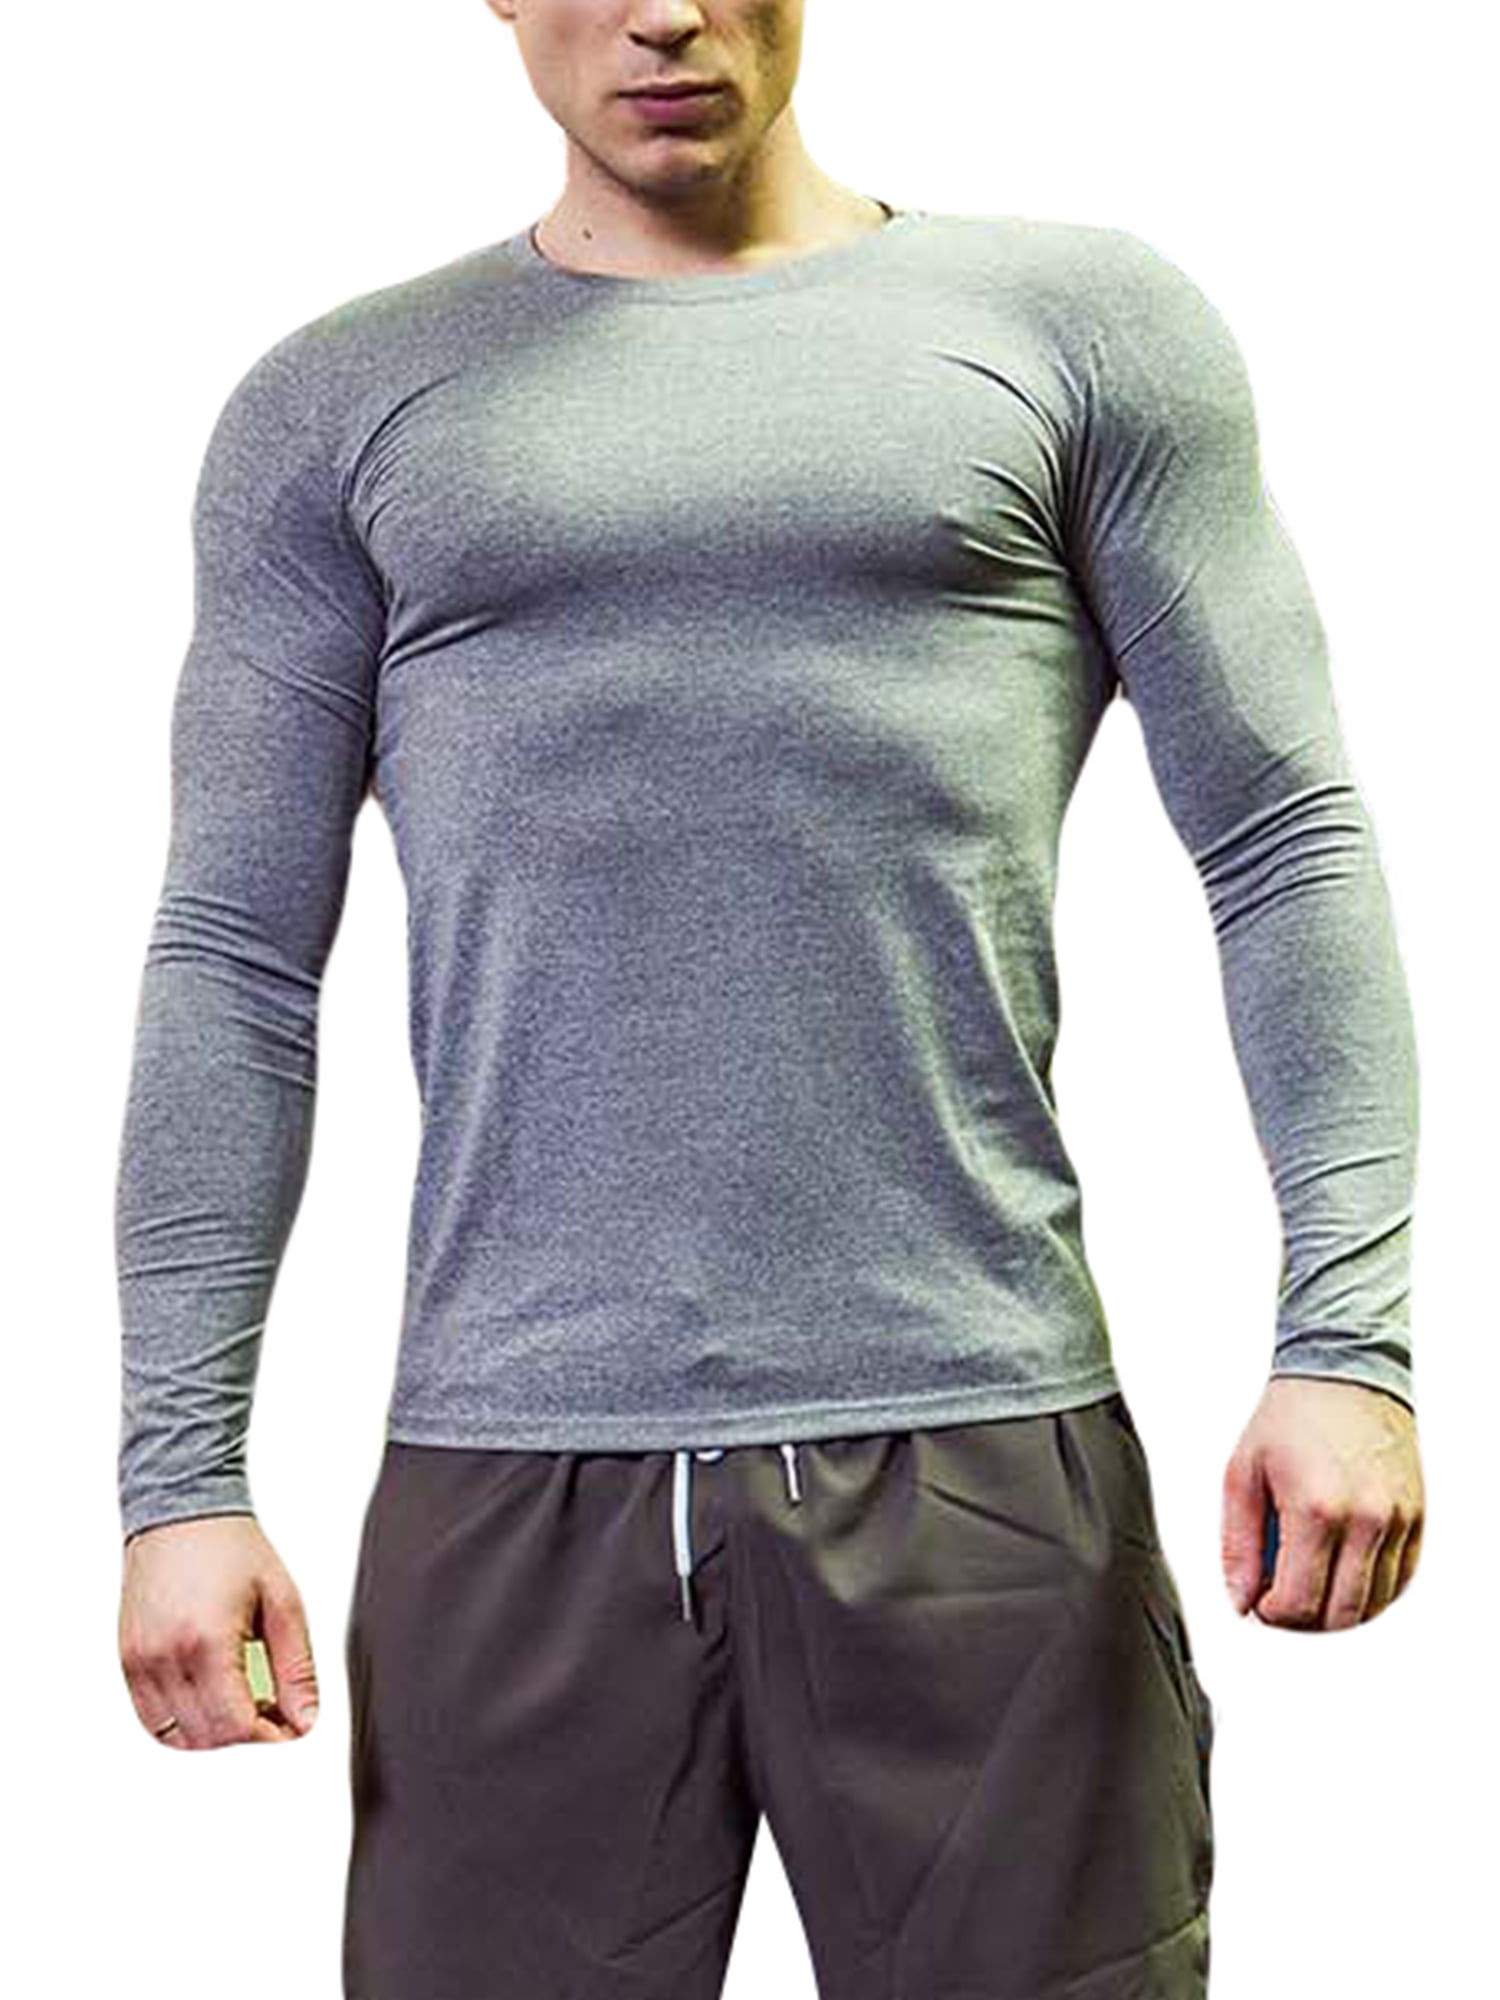 Men's Compression Base Layer Long Sleeve Workout T-Shirt Gym Sport Fitness Tops 